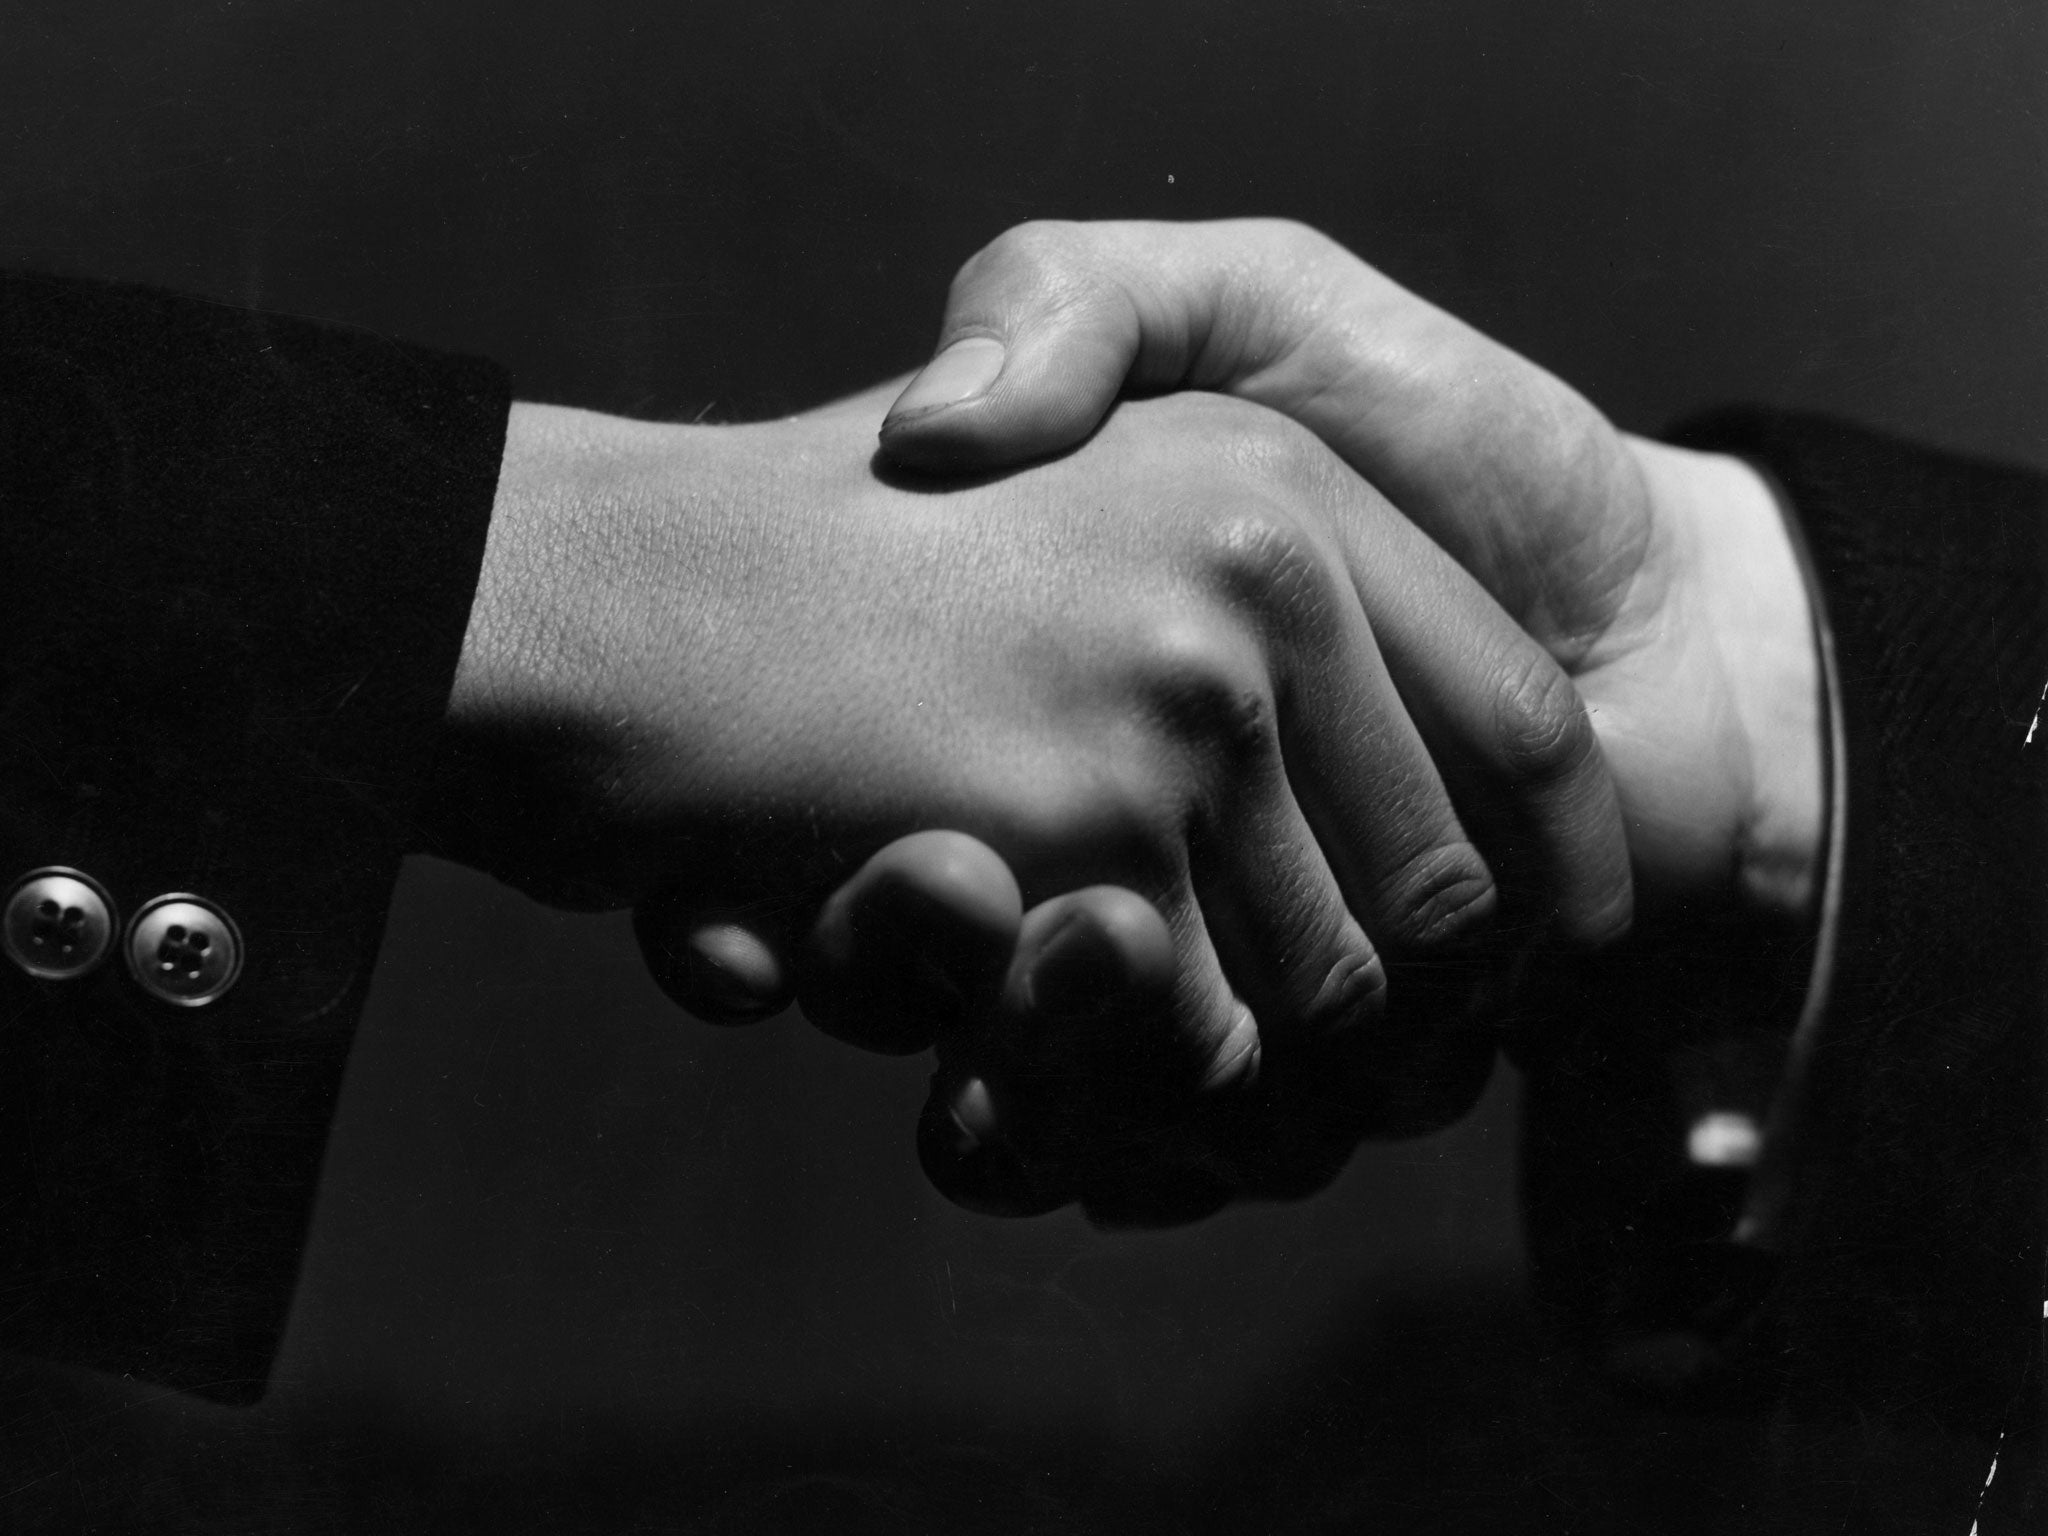 16th February 1938: A close-up of two hands grasping each other in a firm handshake.